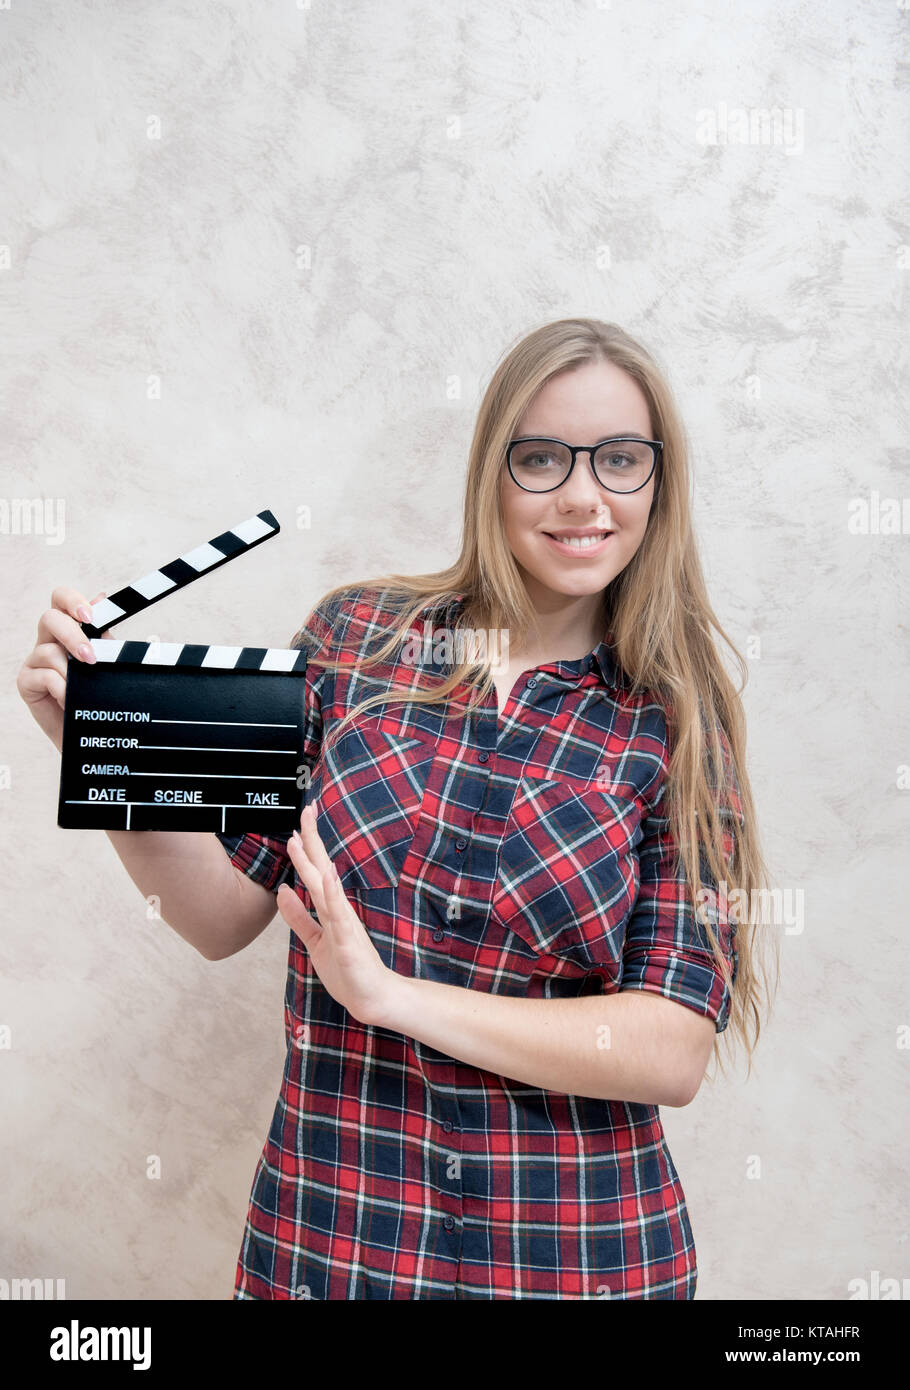 Young blonde woman actress posing with movie clapper board smiling and looking at camera Stock Photo